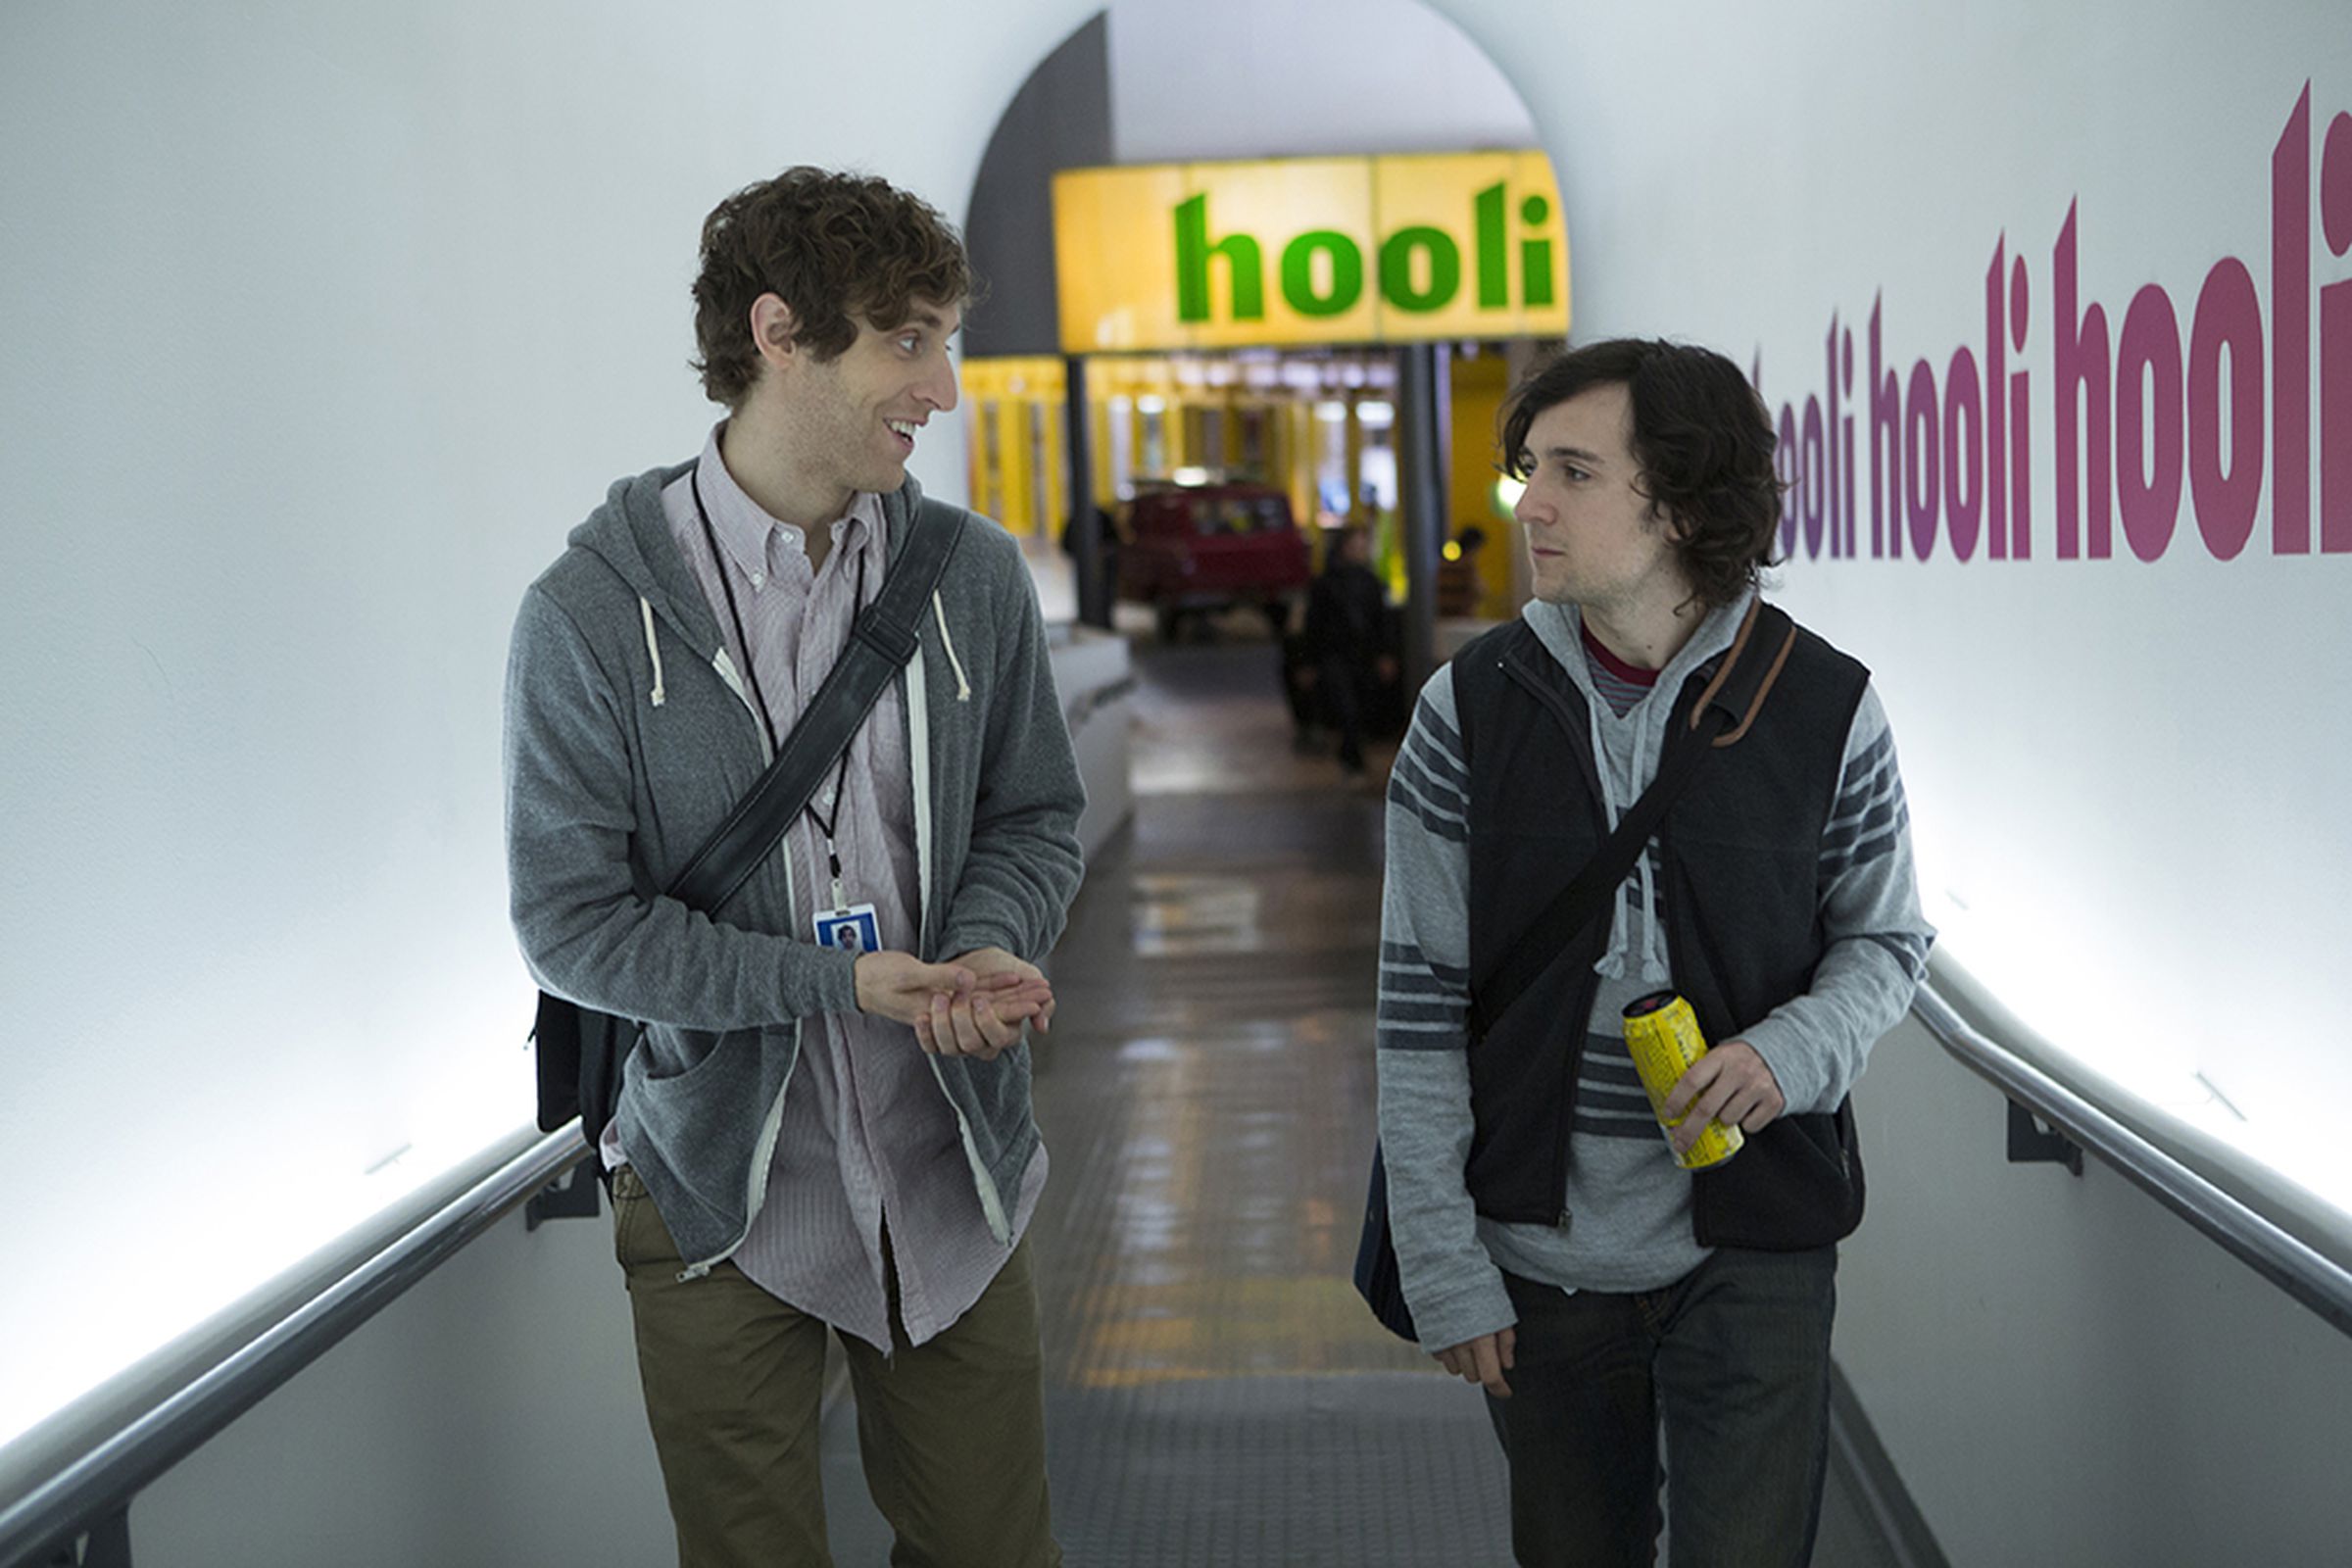 Promotional image from HBO's 'Silicon Valley'